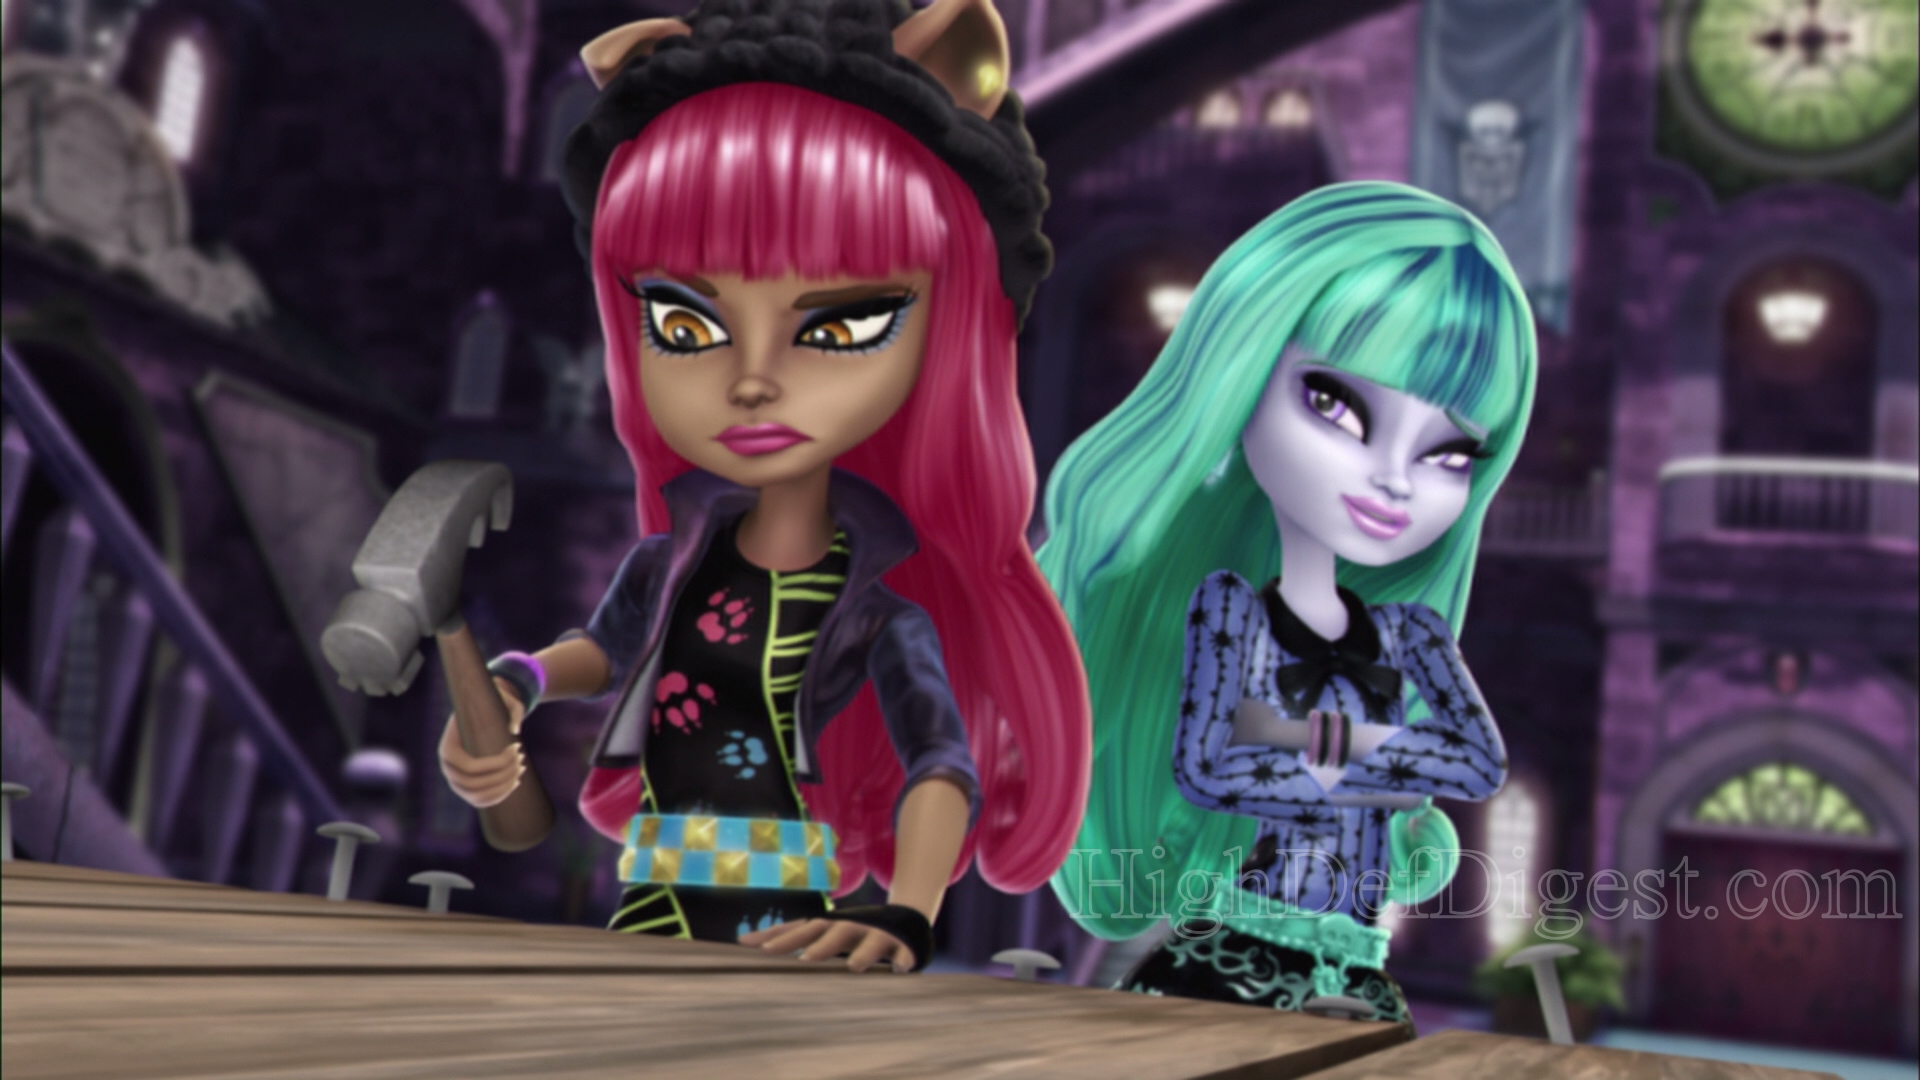 Monster High: 13 Wishes Blu-ray Review | High Def Digest